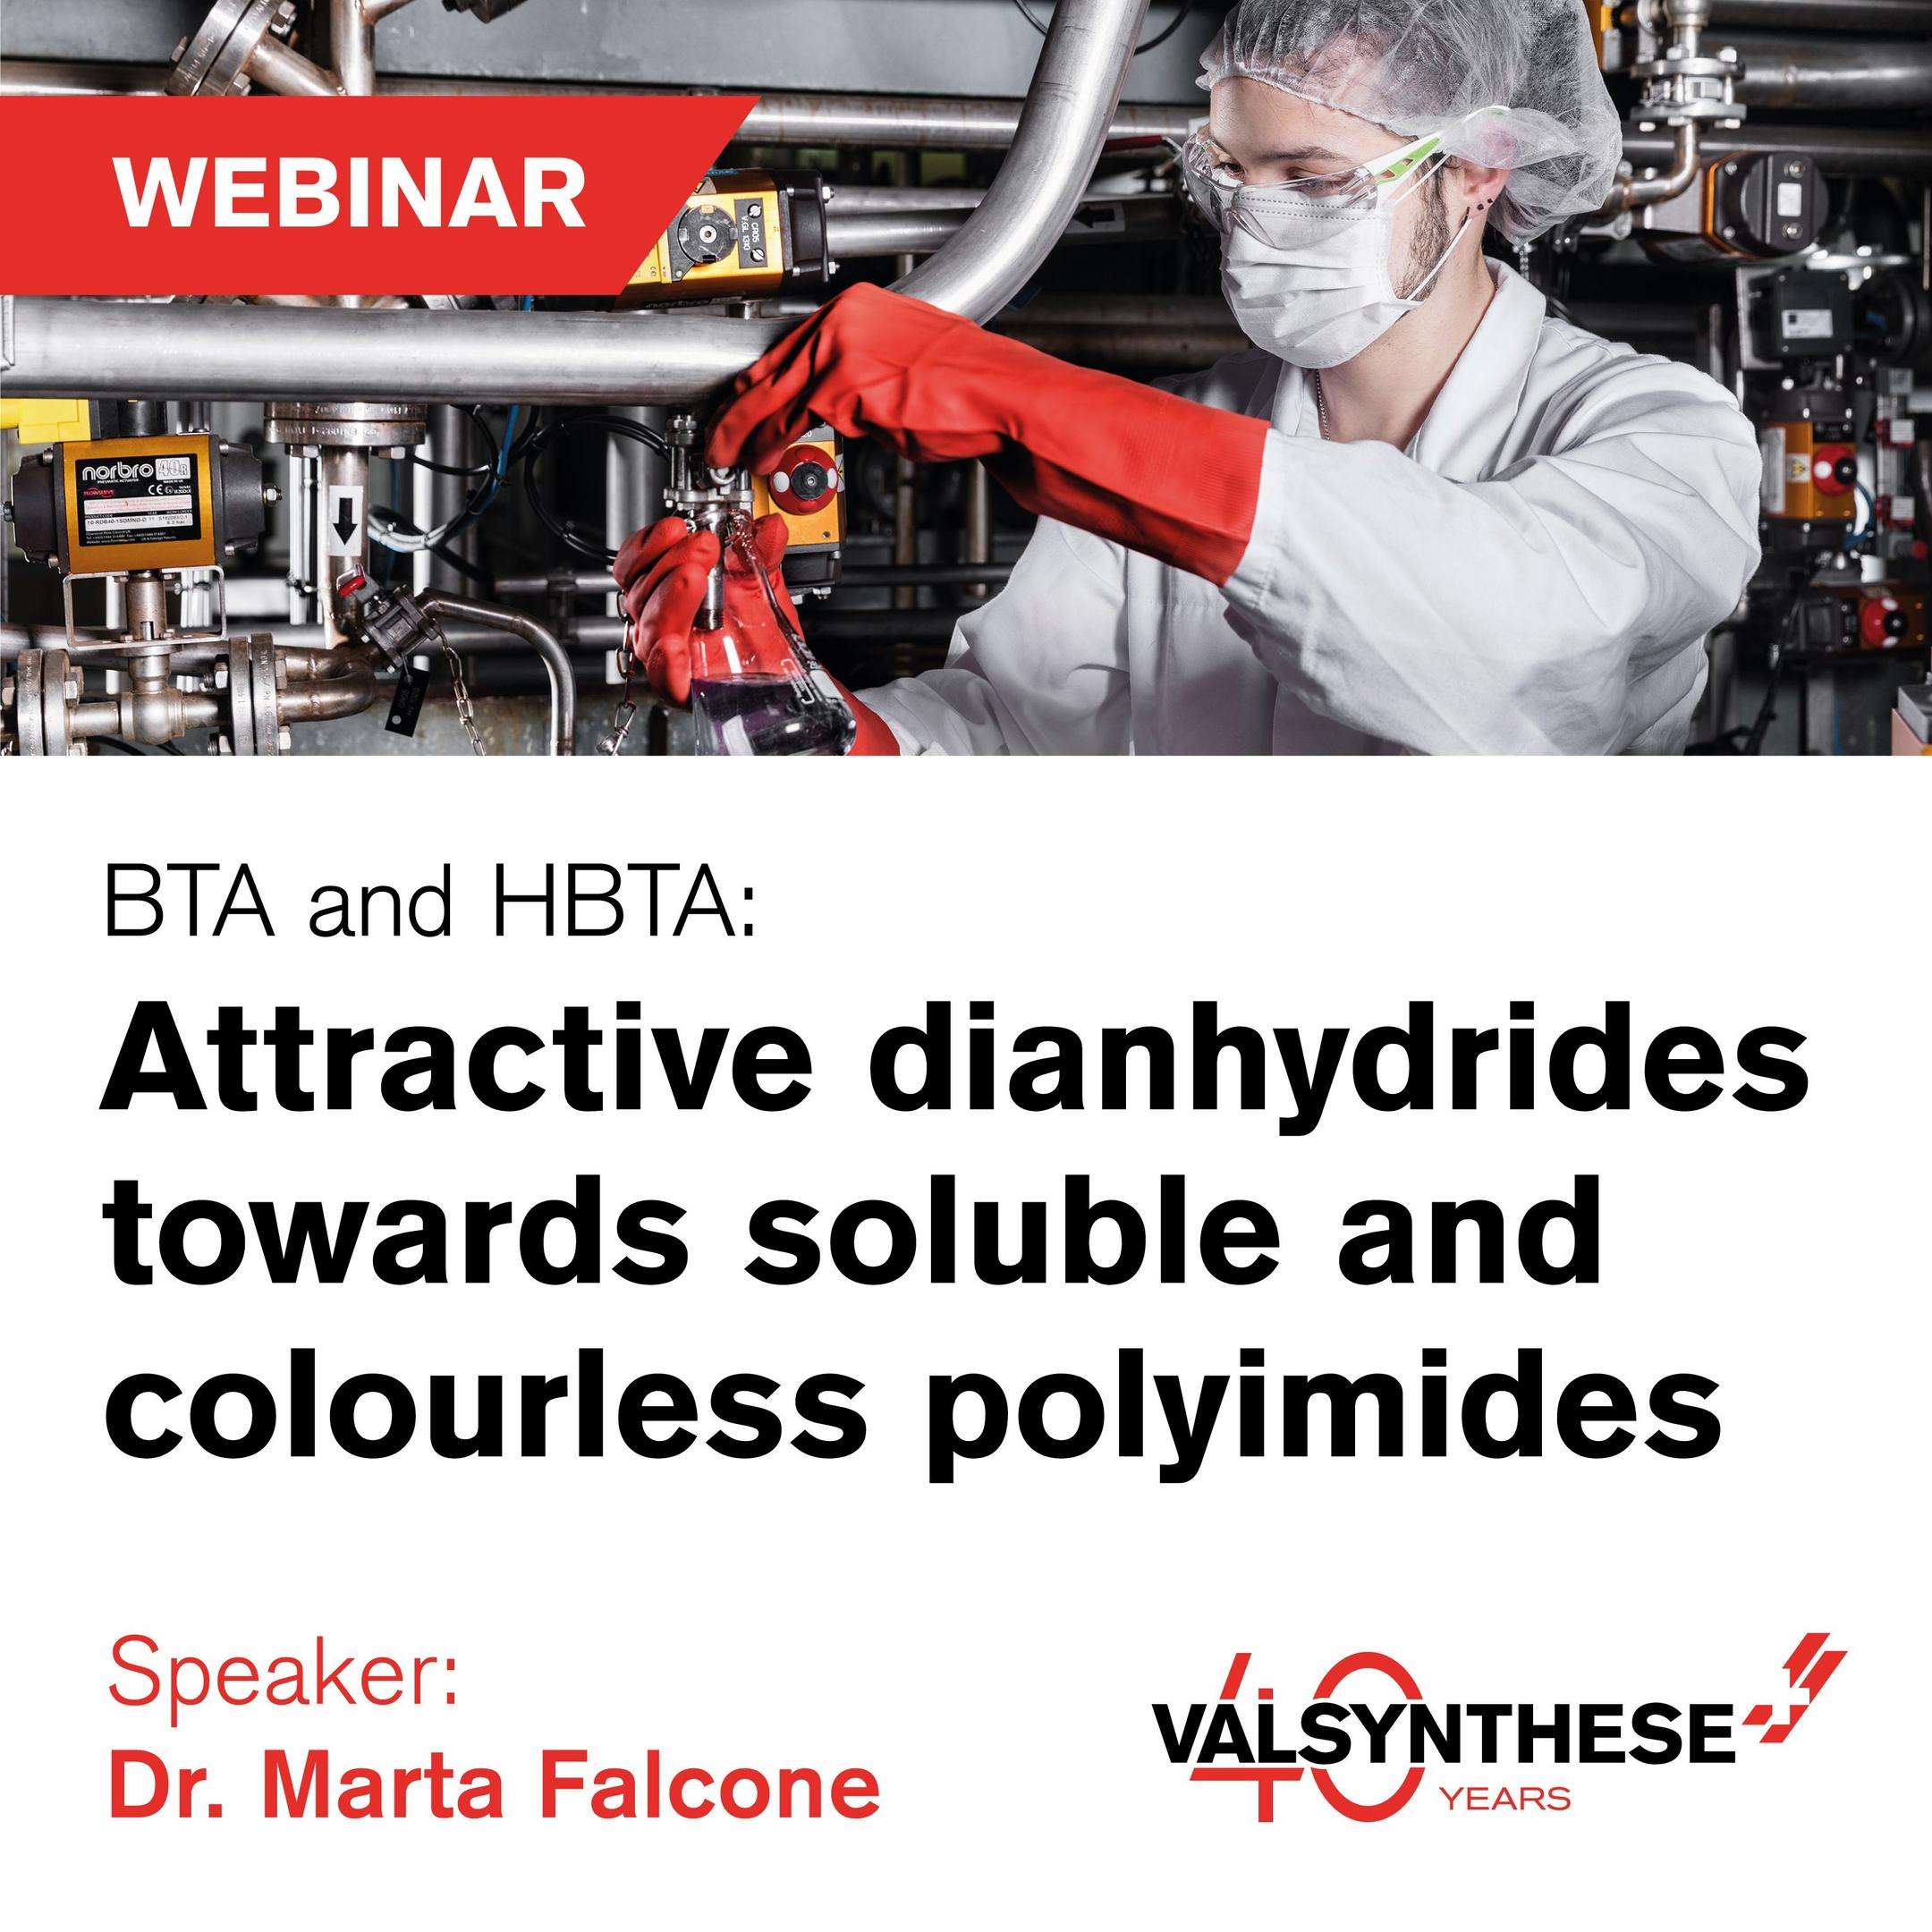 BTA and HBTA: Attractive dianhydrides towards soluble and colourless polyimides